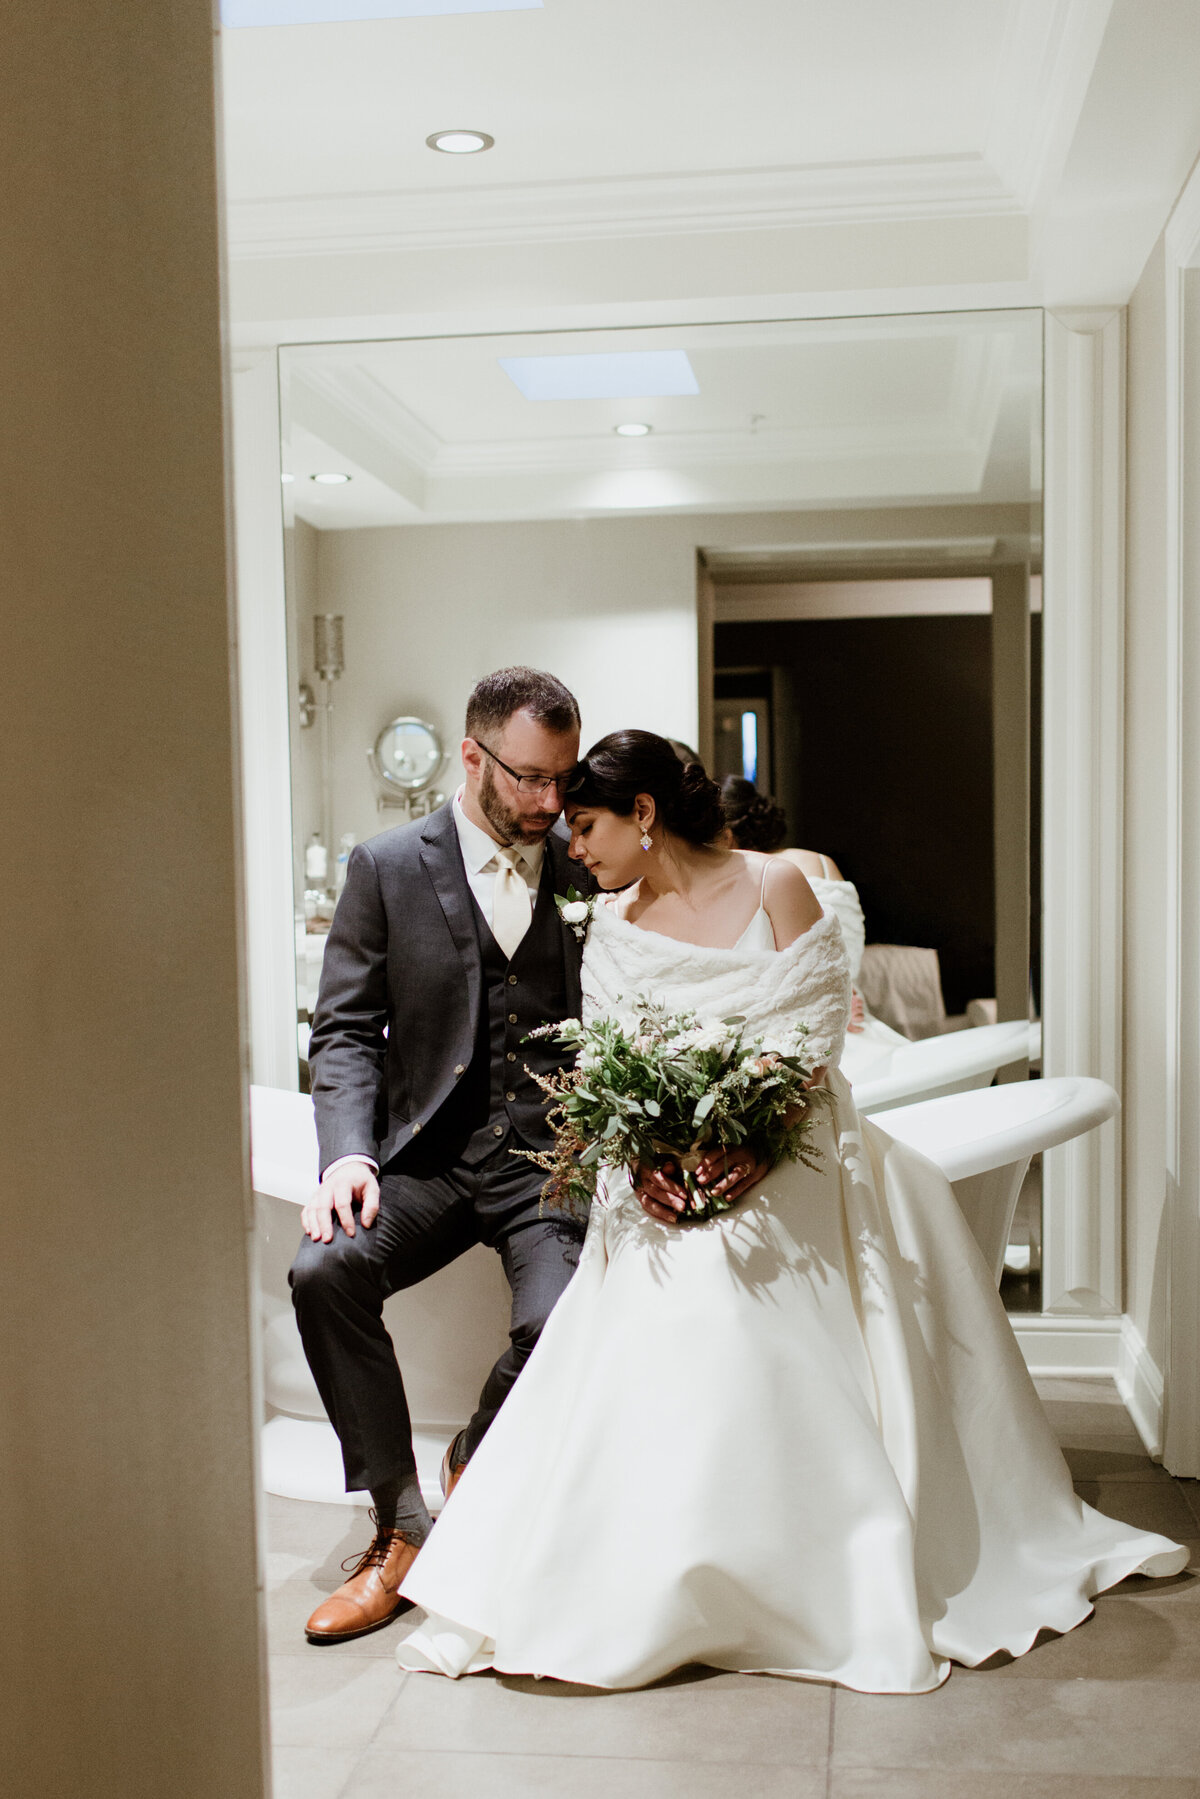 A quiet, romantic moment of a couple in wedding attire sitting in a hotel bathroom. Captured by Fort Worth wedding photographer, Megan Christine Studio